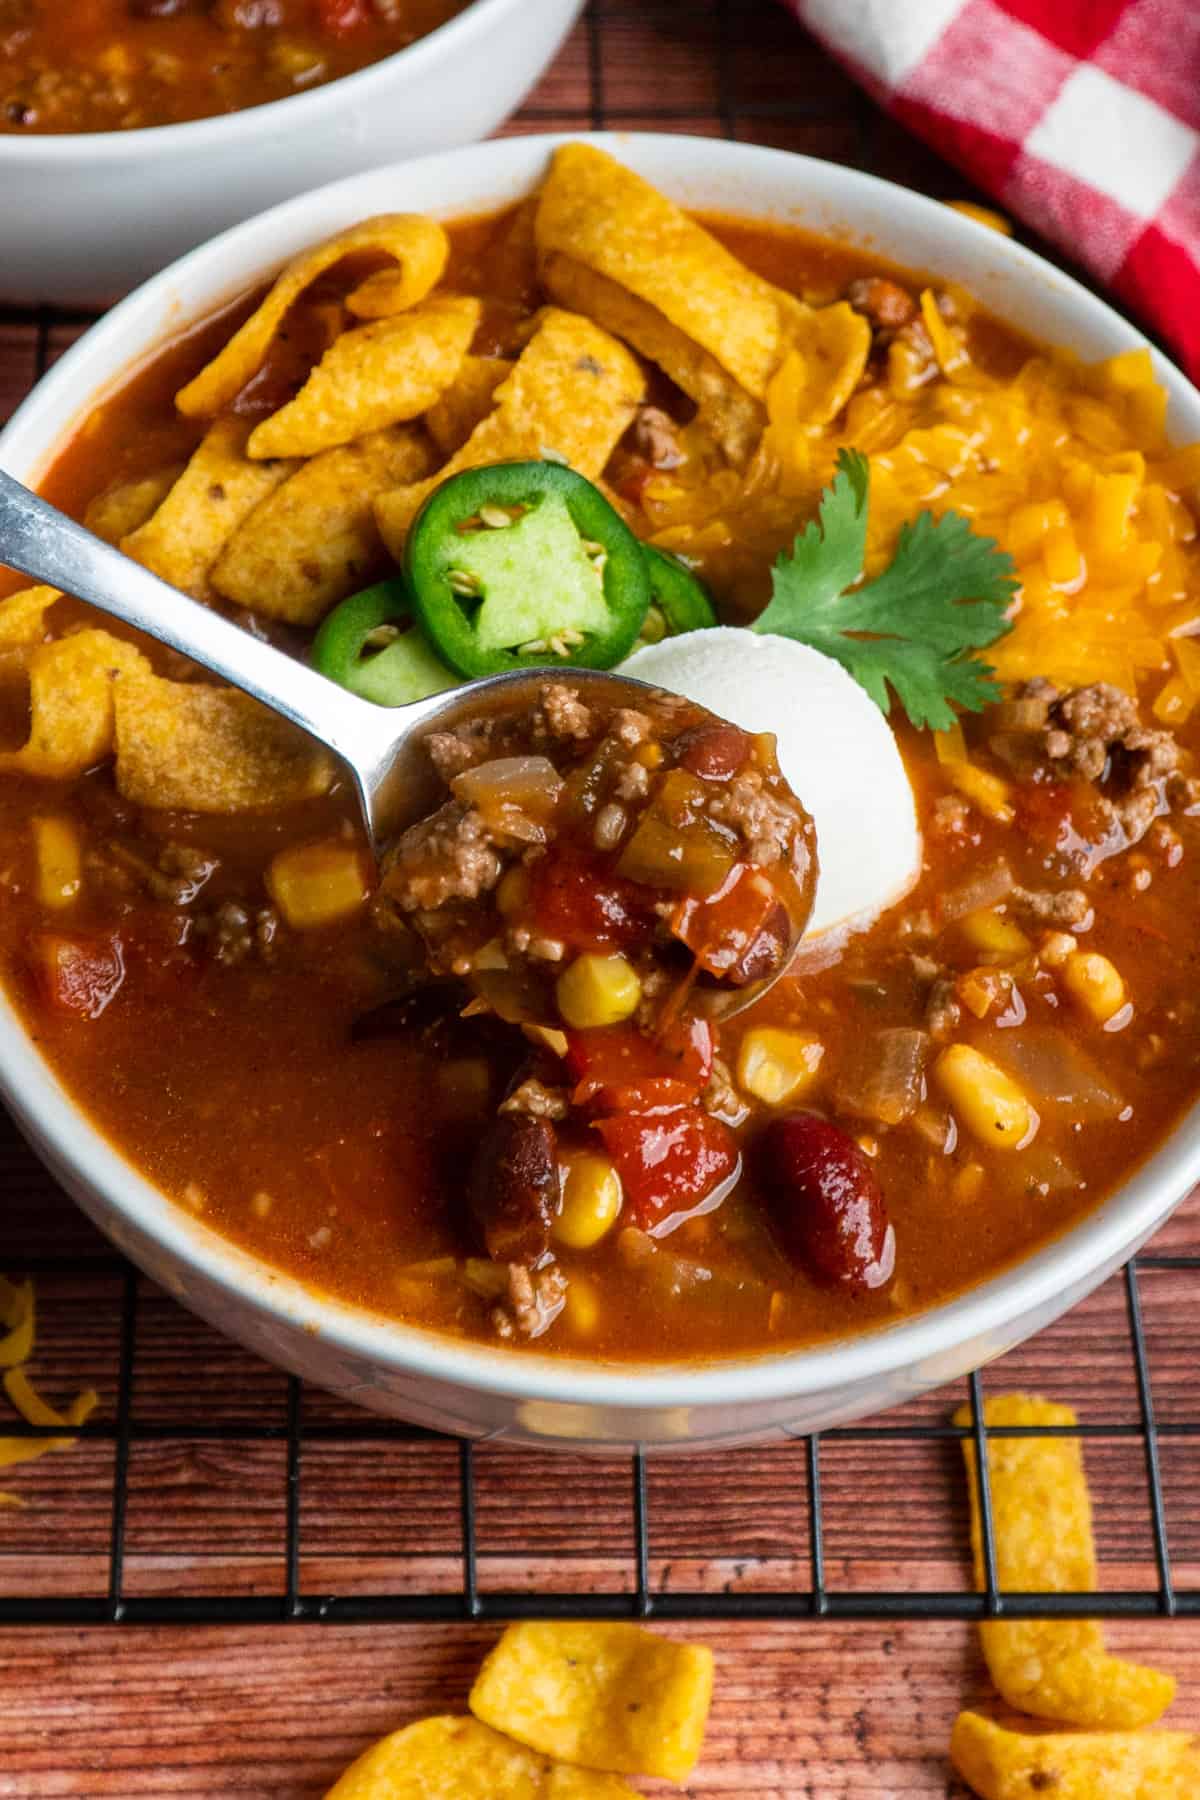 A spoon holding a bite of taco soup.